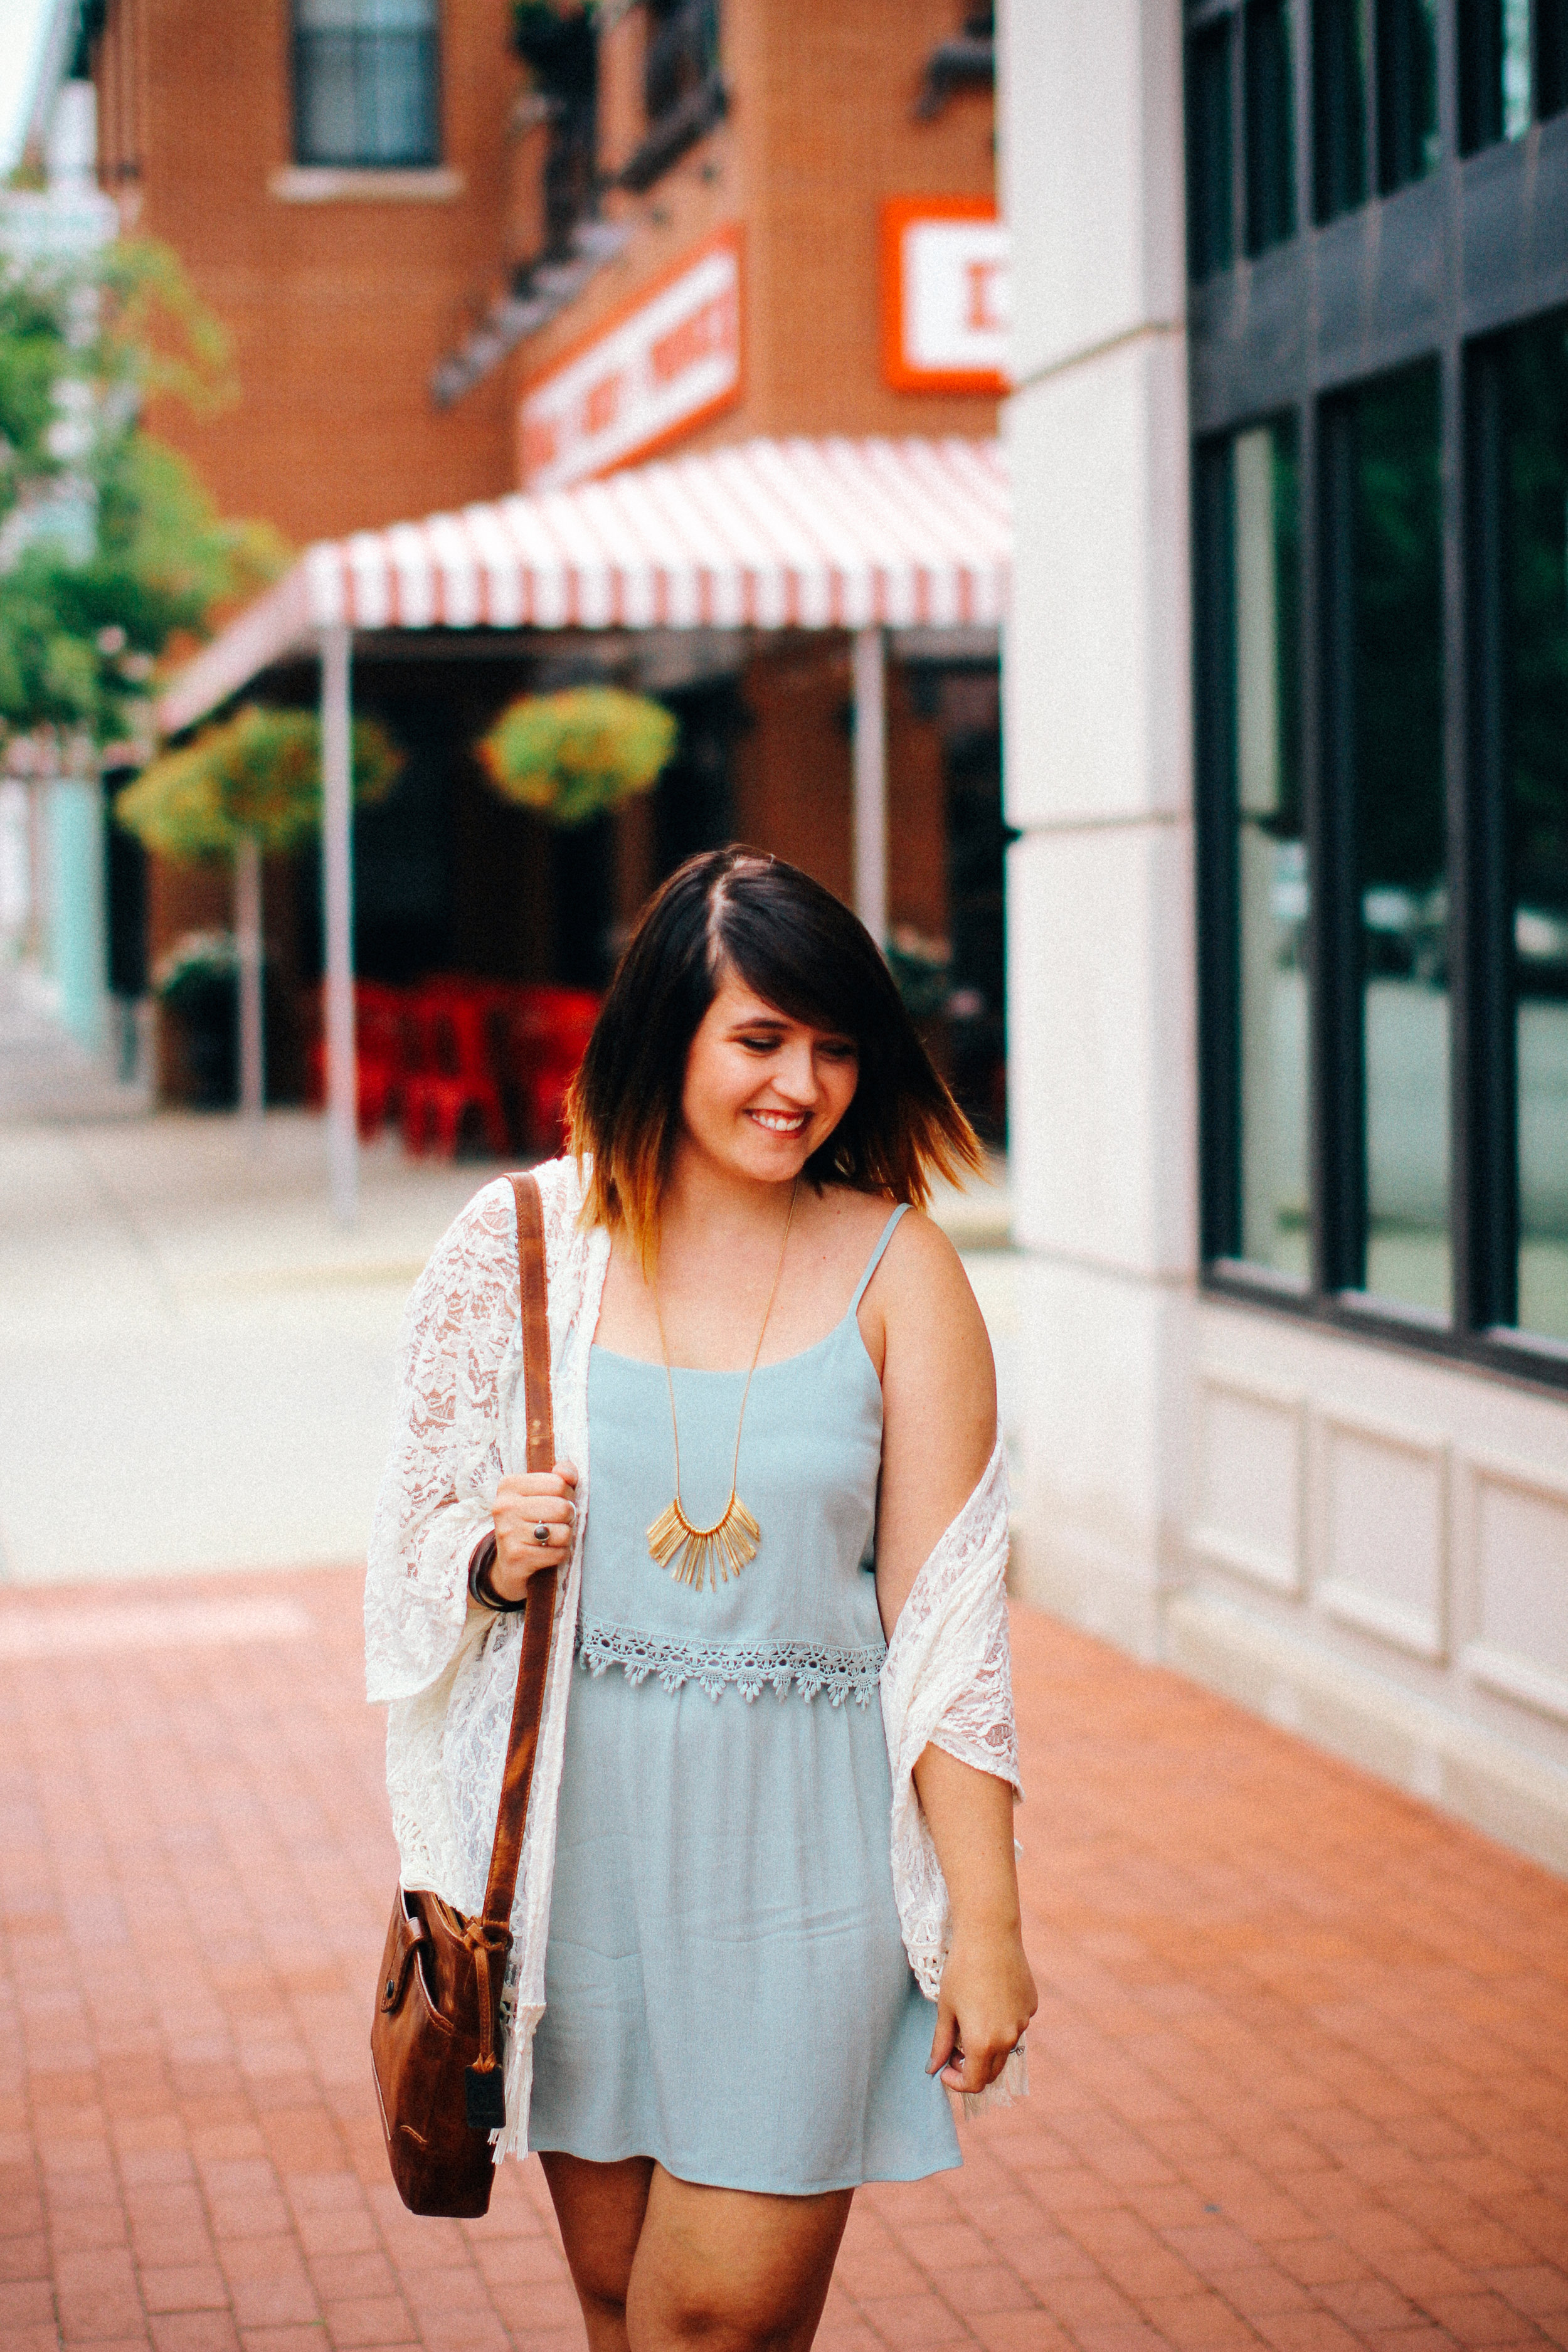 Leather + Lace Fall Style via chelceytate.com / @forever21 @thefryecompany @modcloth @americaneagle